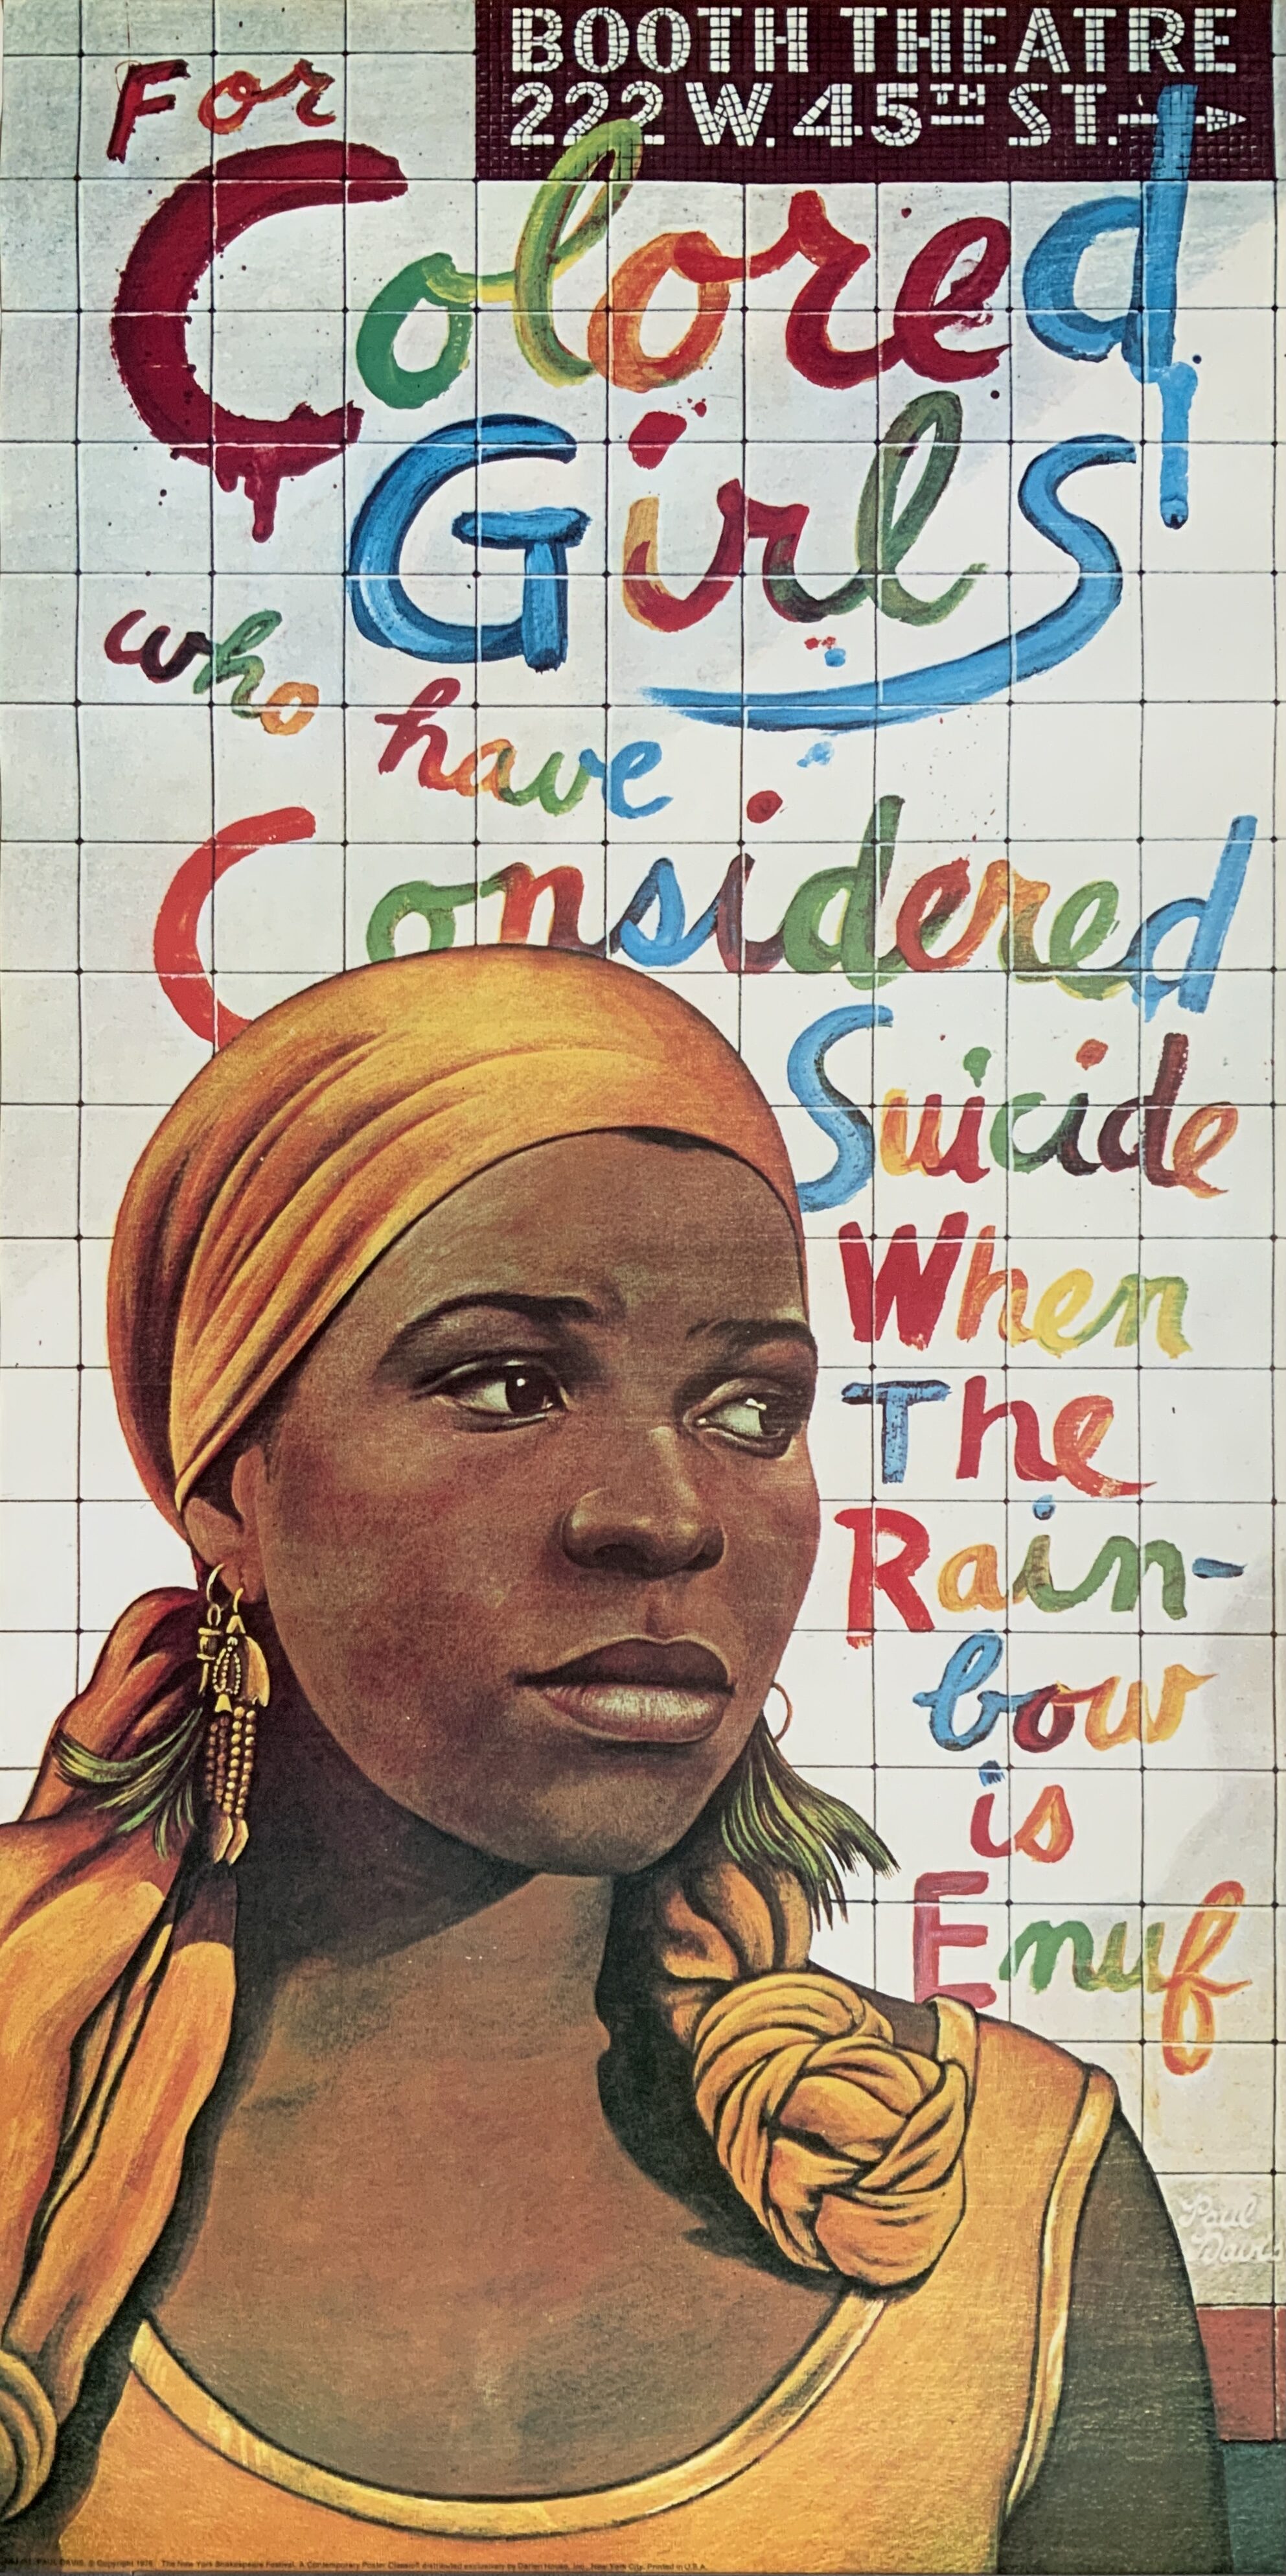 WW525 FOR COLORED GIRLS WHO HAVE CONSIDERED SUICIDE WHEN THE RAINBOW IS ENUF - BOOTH THEATER